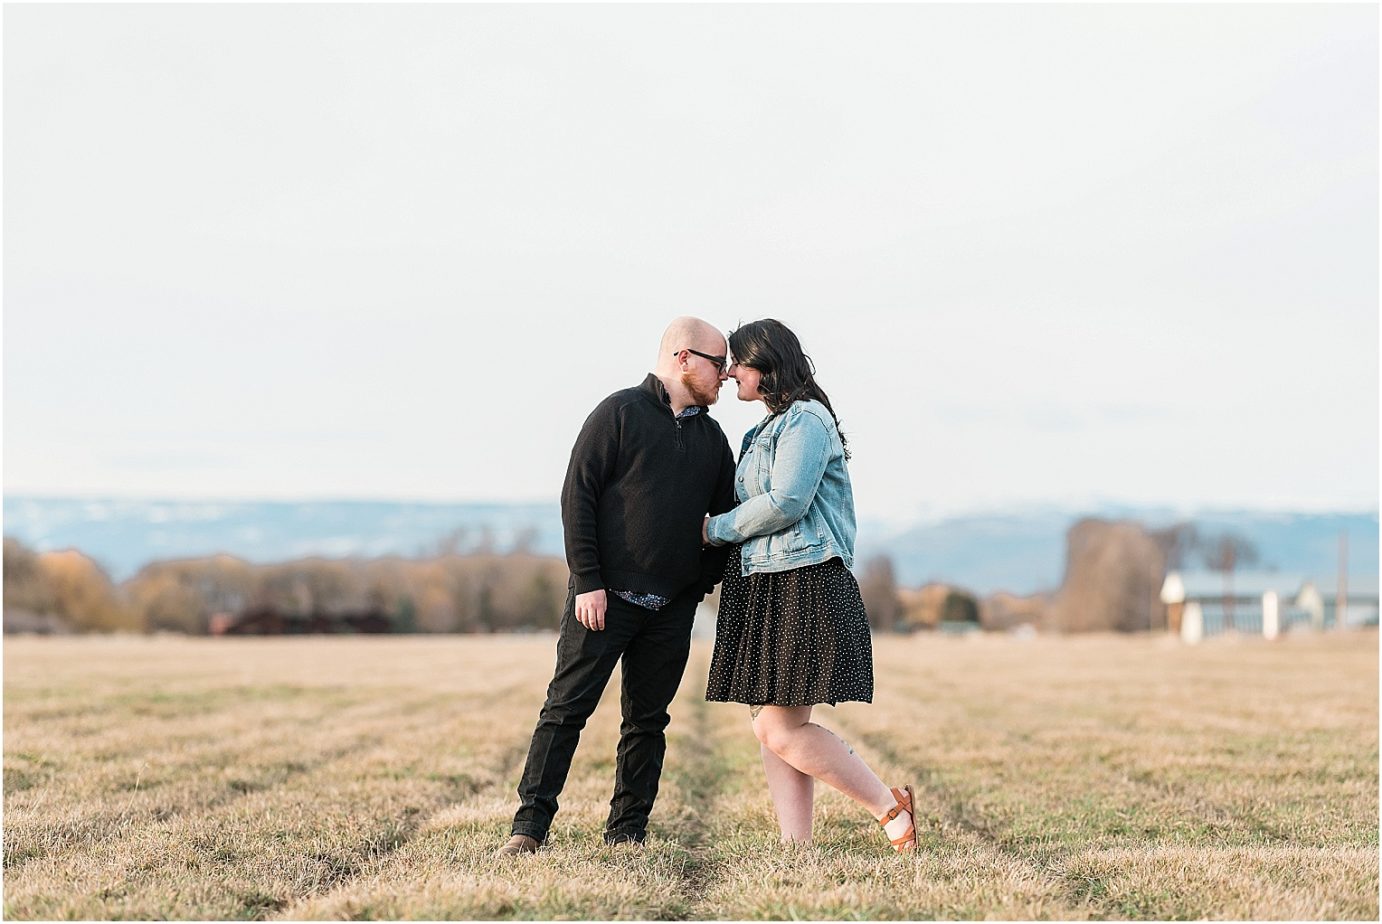 Olmstead Place Engagement Session Ellensburg Photographer Forrest and Gemma In field